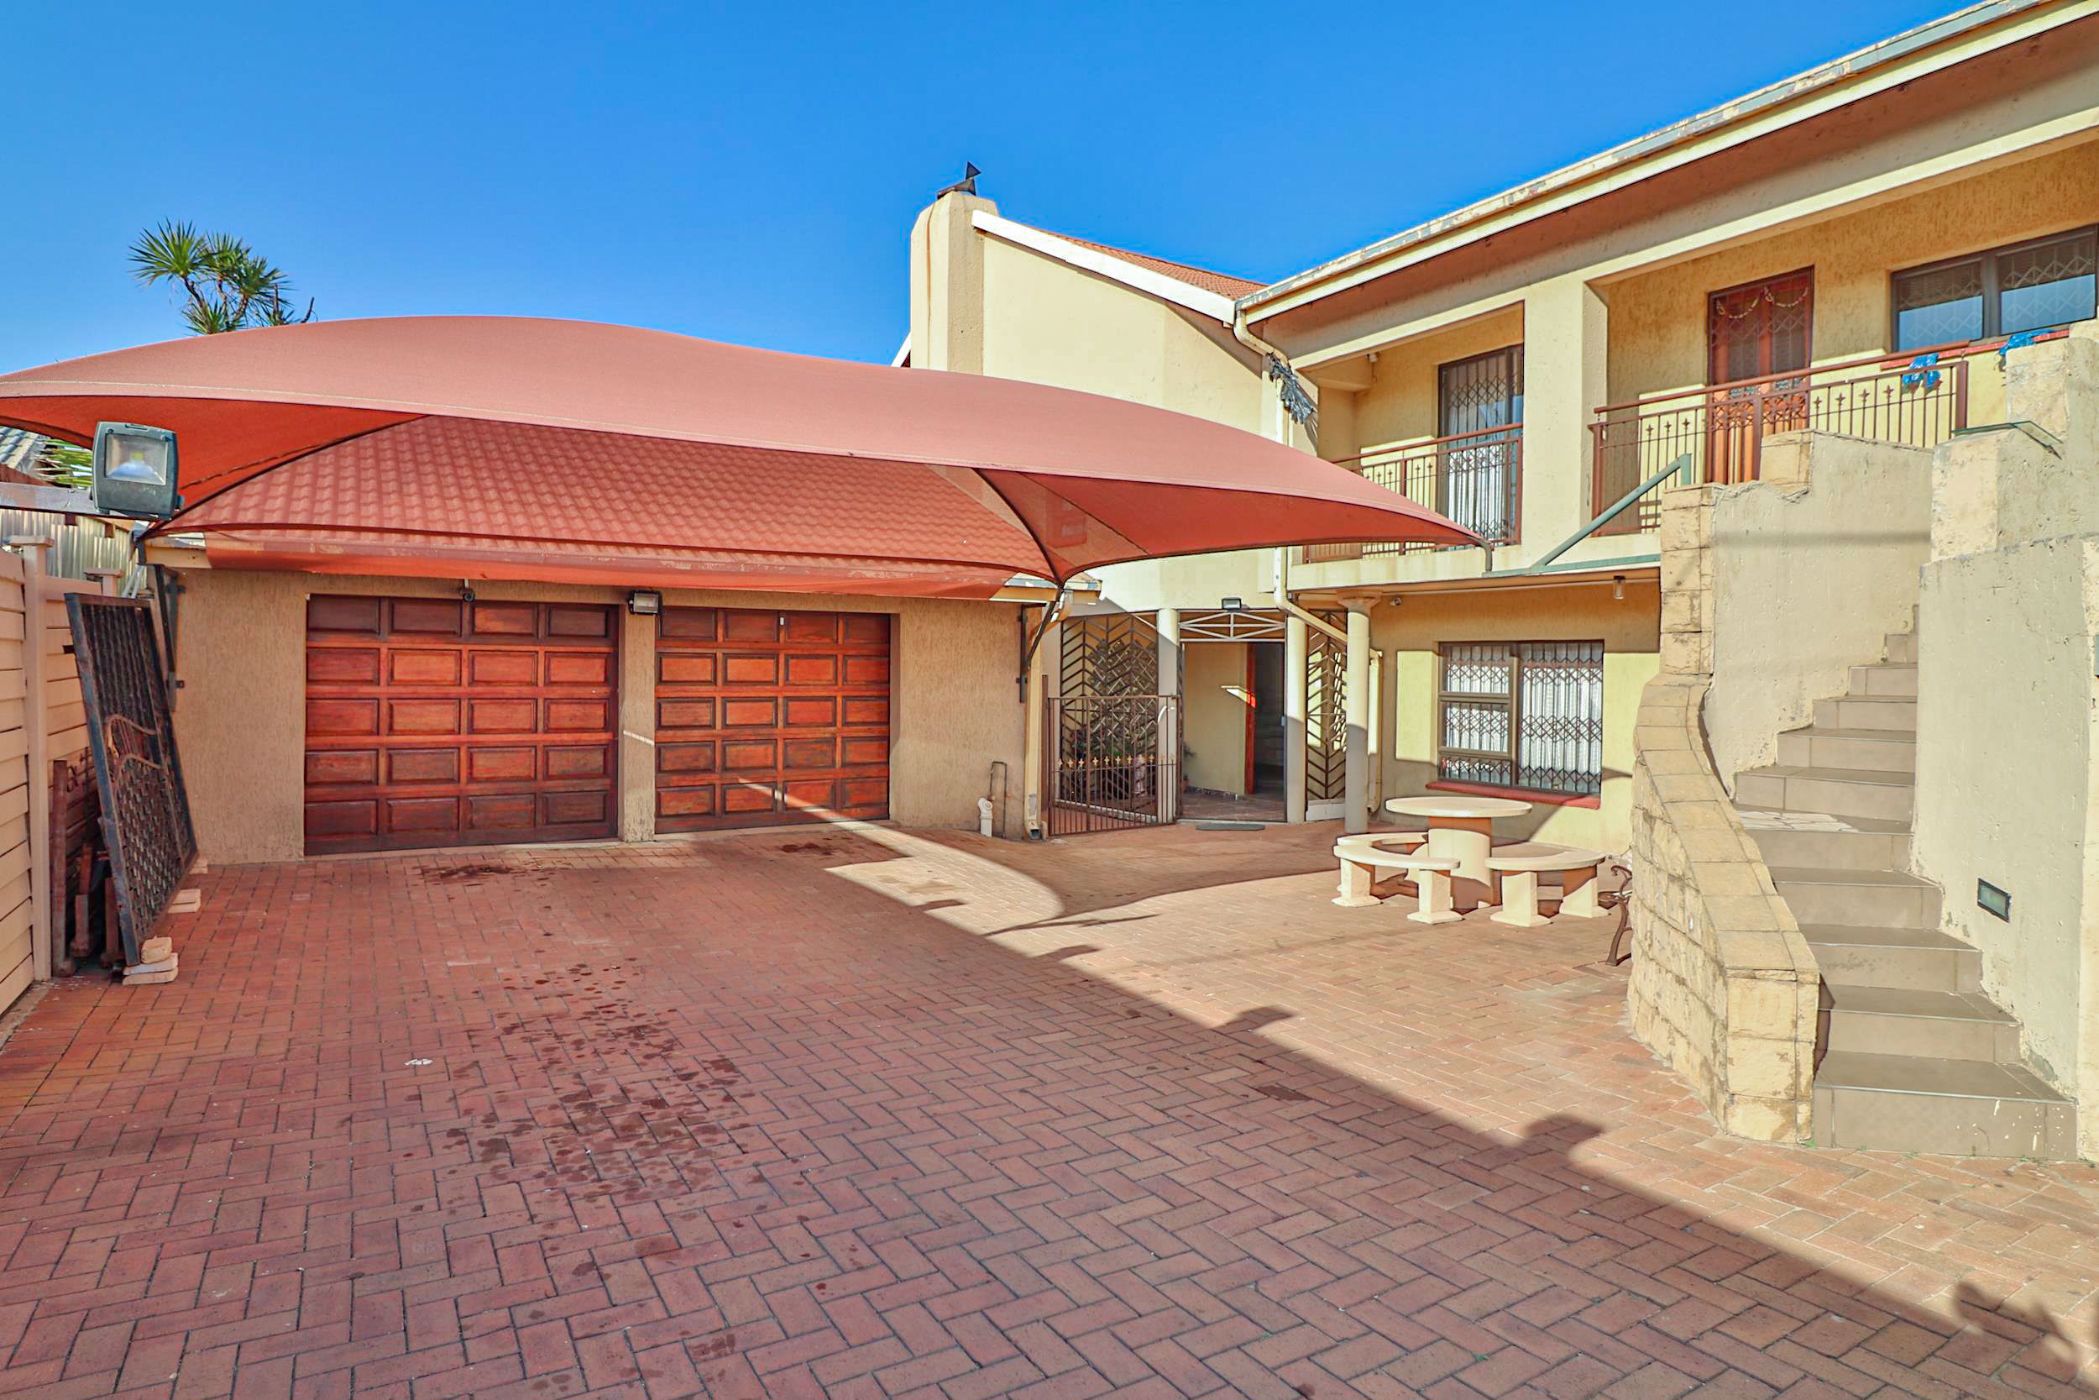 13 bedroom house for sale in Lenasia South